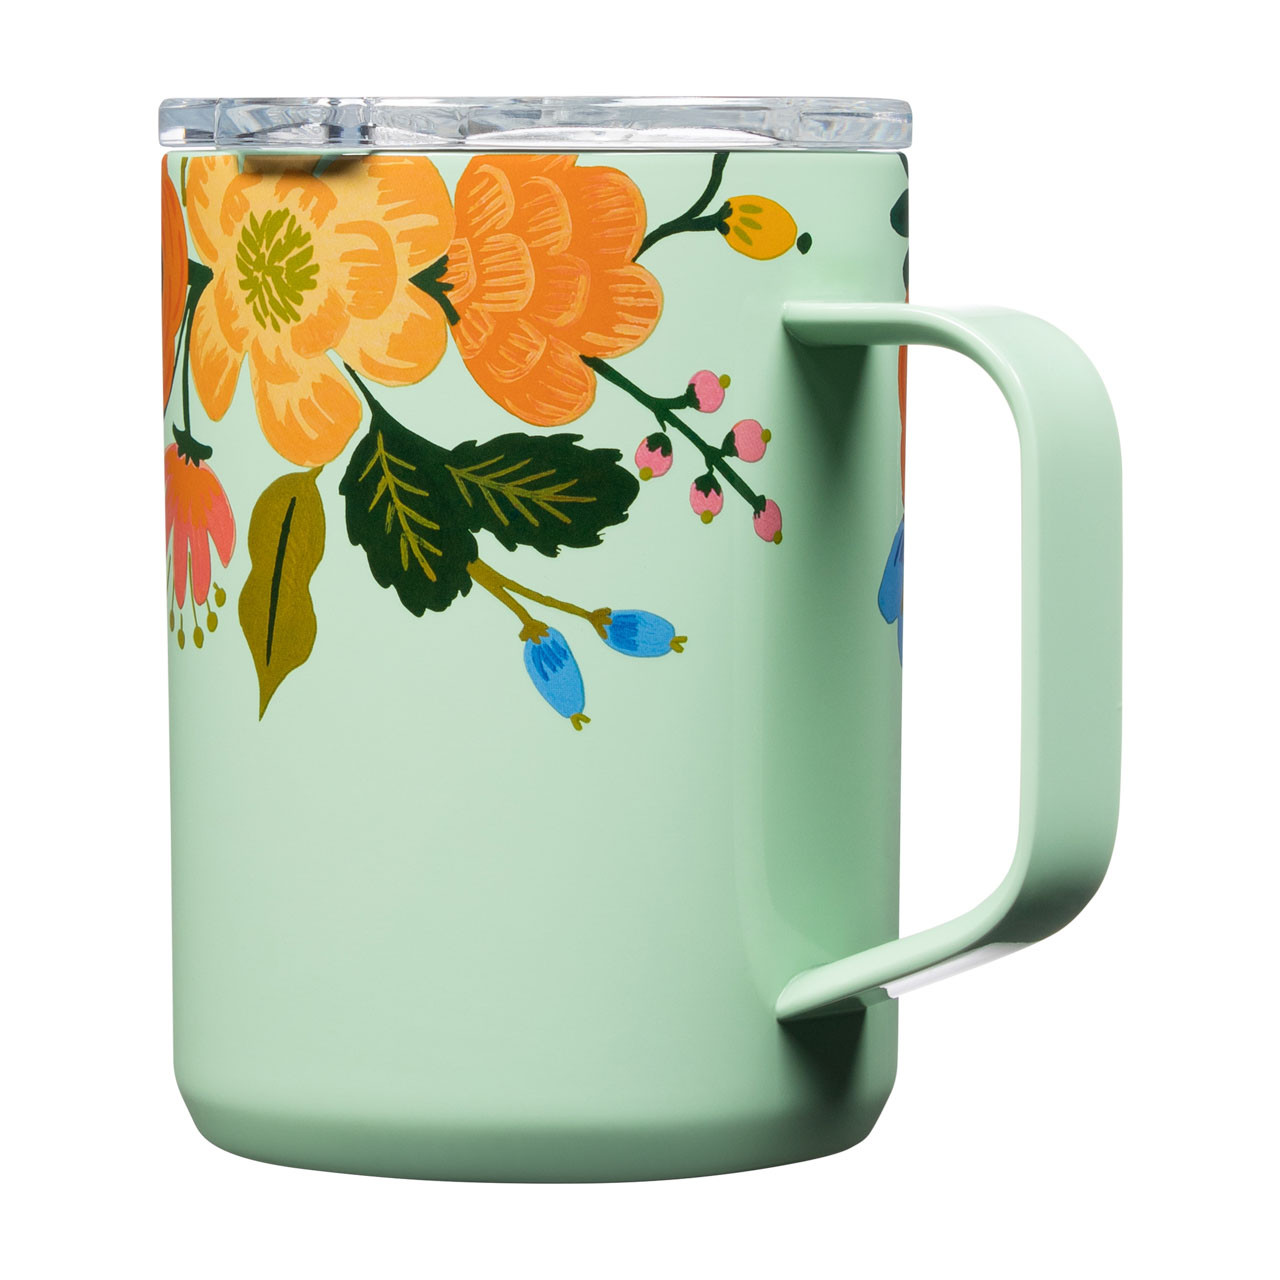 https://cdn11.bigcommerce.com/s-6zwhmb4rdr/images/stencil/1280x1280/products/66220/187414/the-lamp-stand-corkcicle-mug-16oz-rie-paper-gloss-mint-lively-floral-rp2516gml-3__85312.1631875882.jpg?c=1